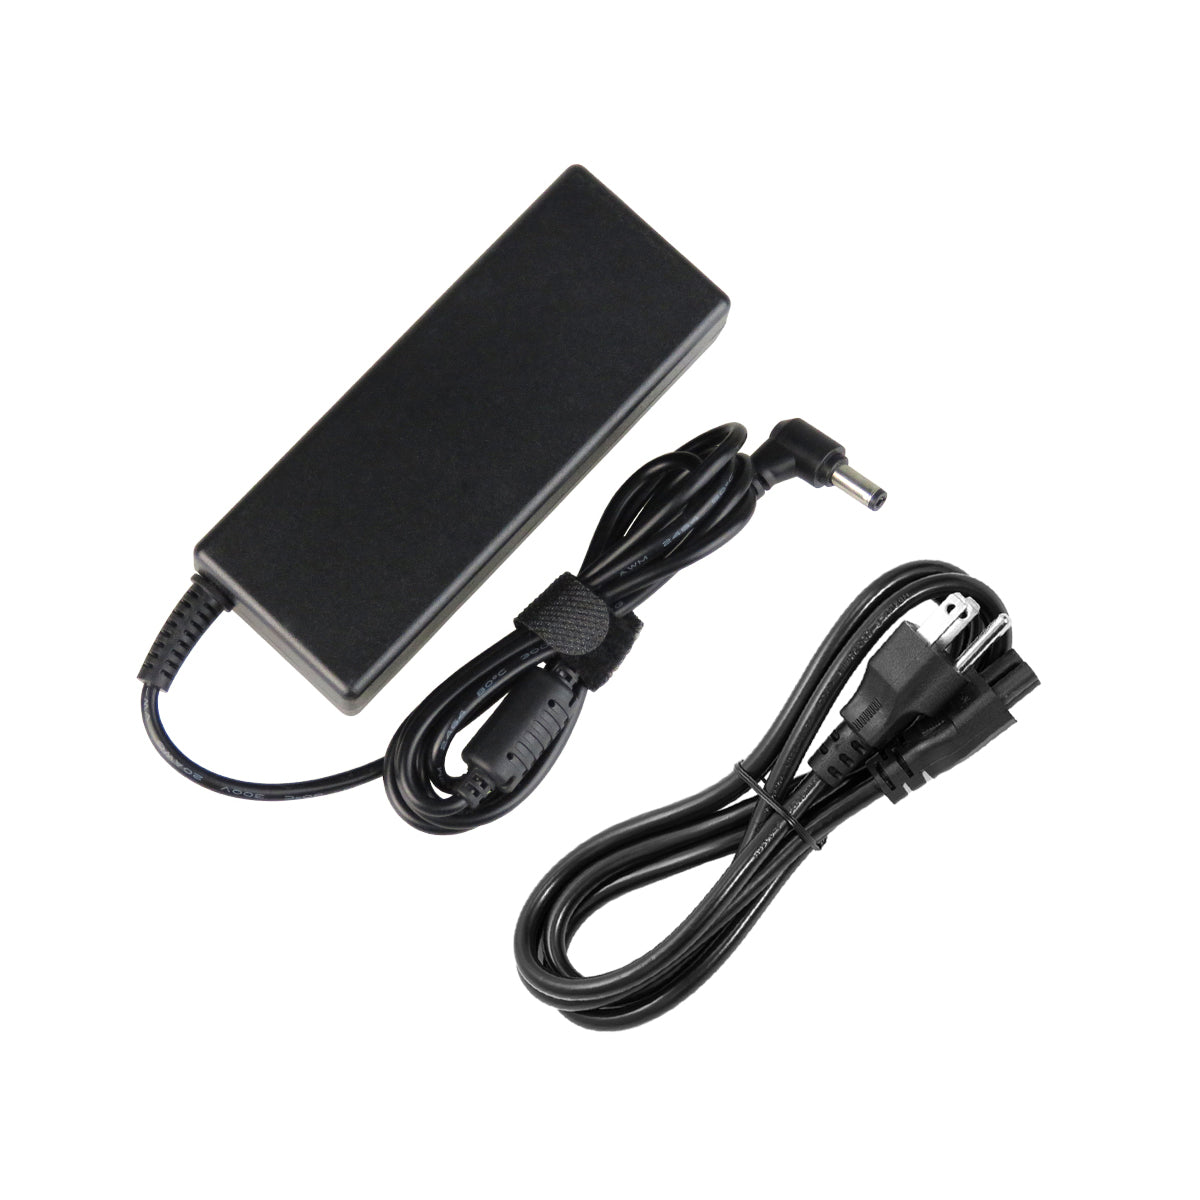 AC Adapter Charger for ASUS S550CA-ESI5T20 Laptop.